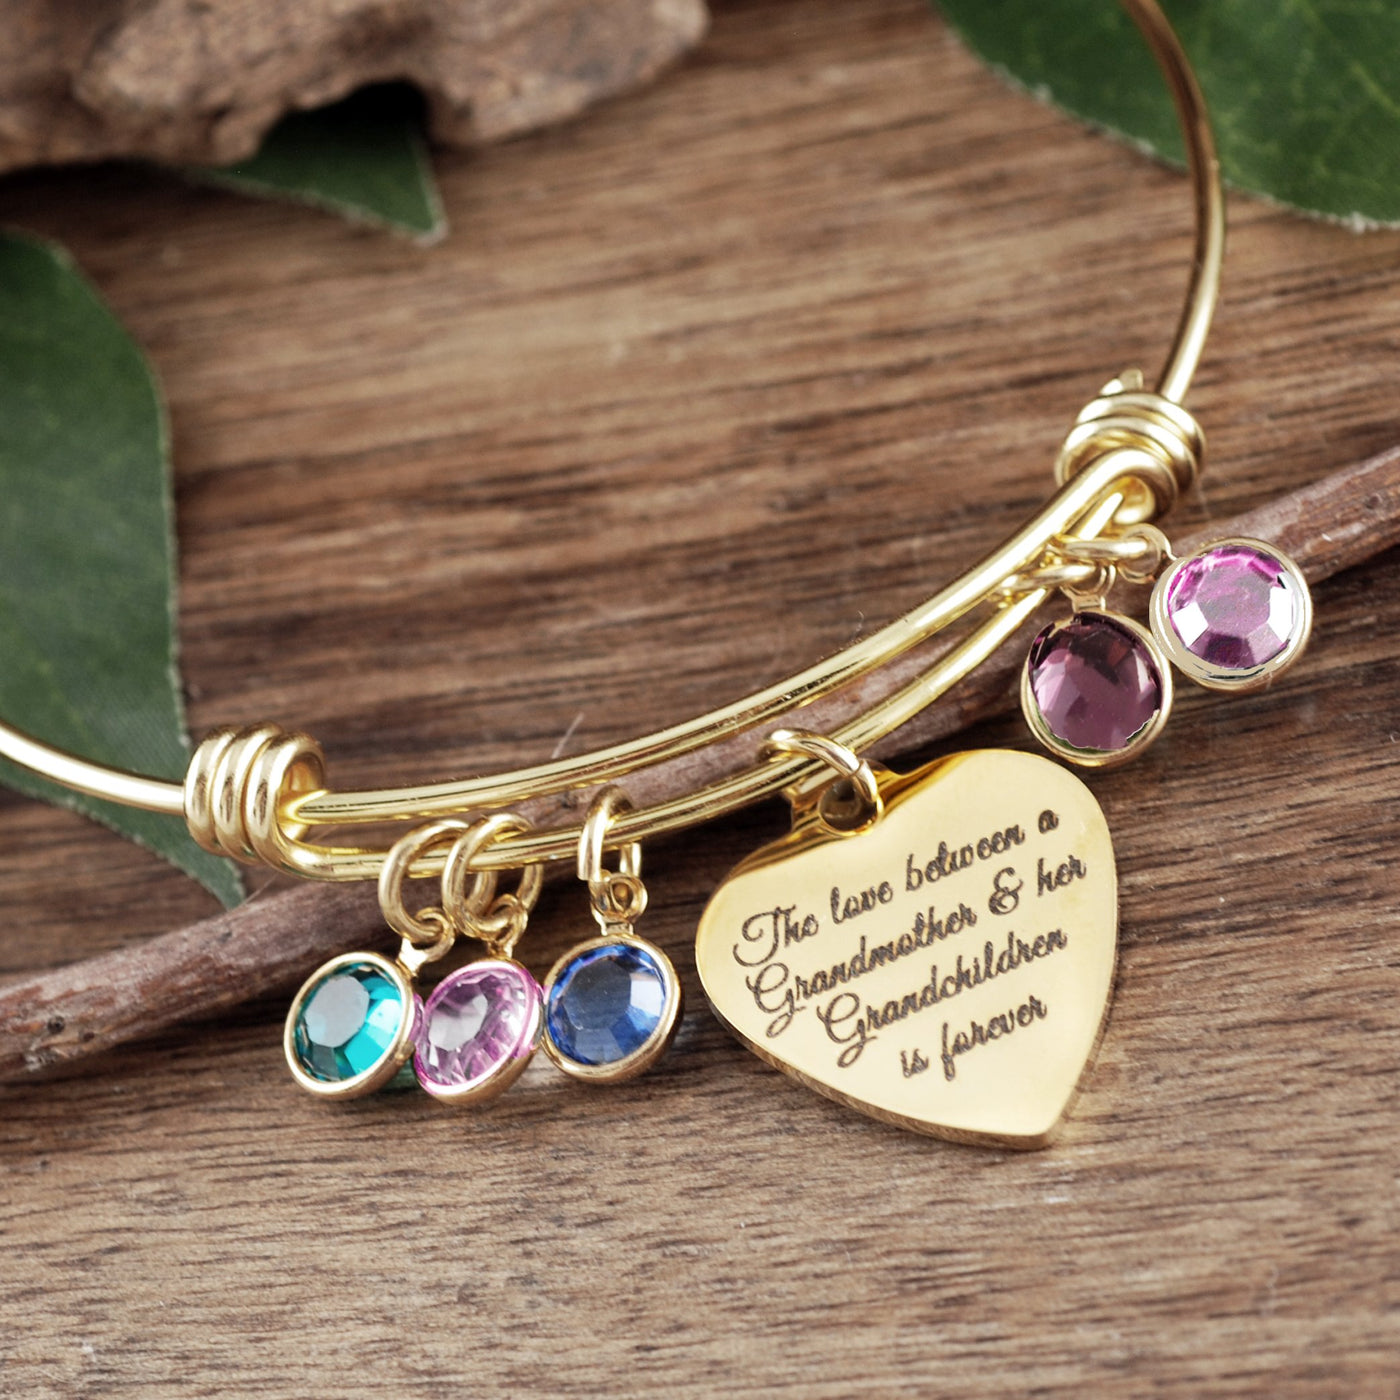 Gold Stainless Steel Grandmother Bracelet with Birthstones